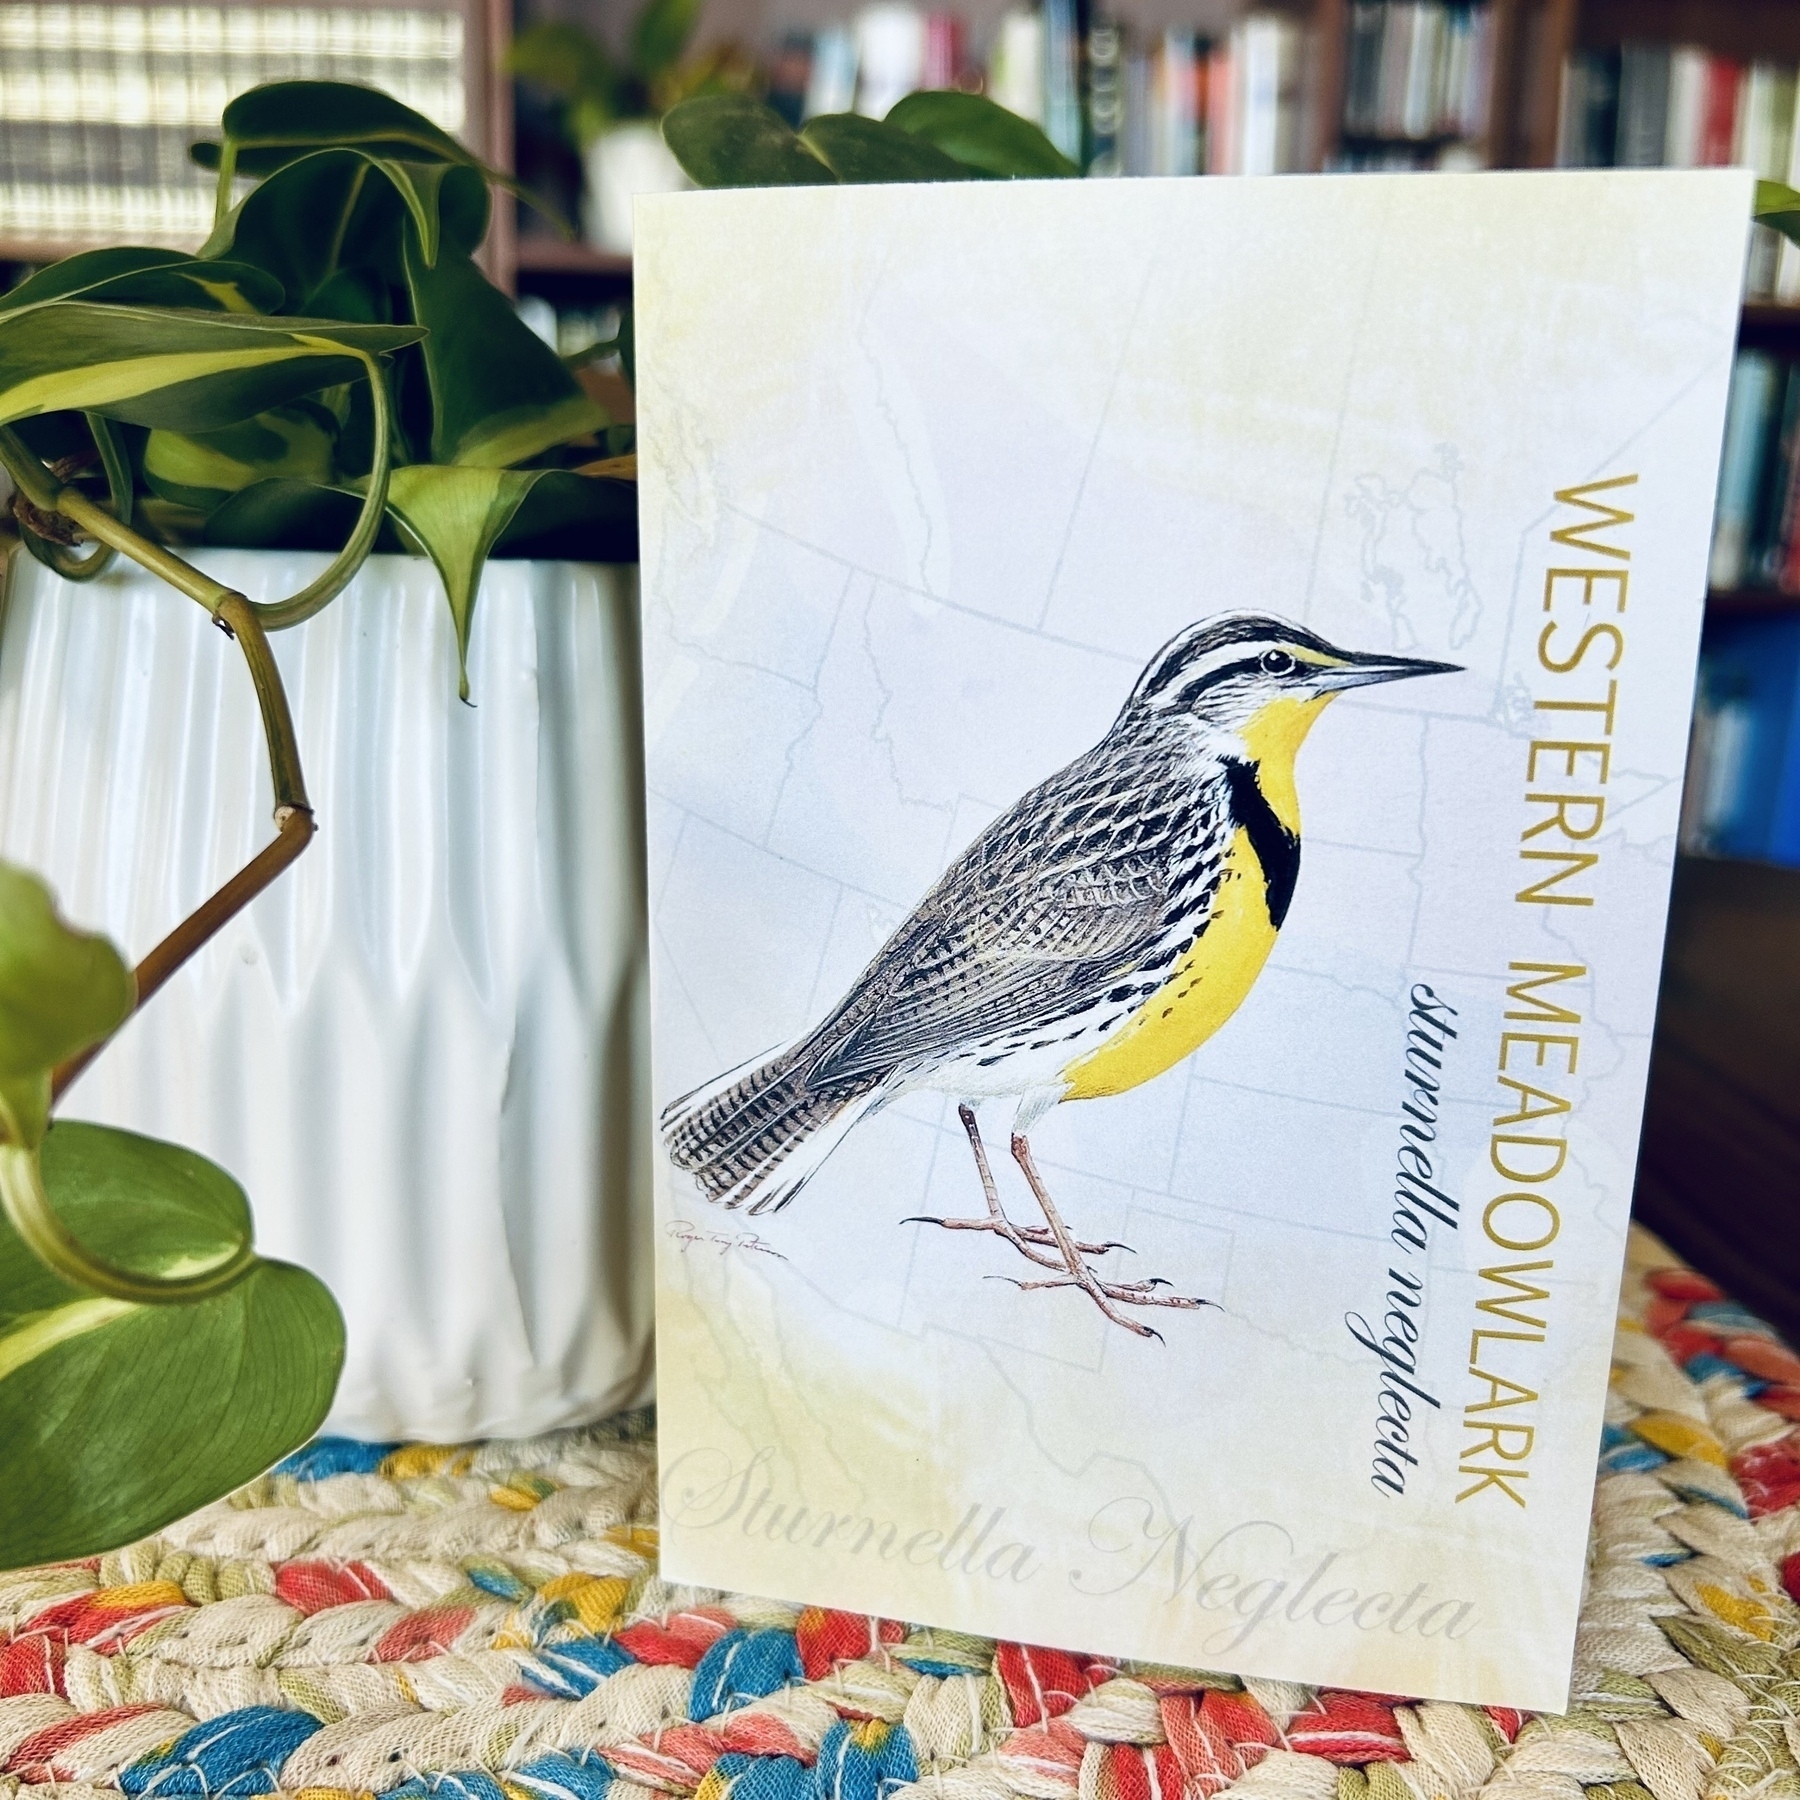 A greeting card stands upright featuring an illustrated Western Meadowlark (Sturnella Neglecta) on the right side with a map of the Western United States in the background.